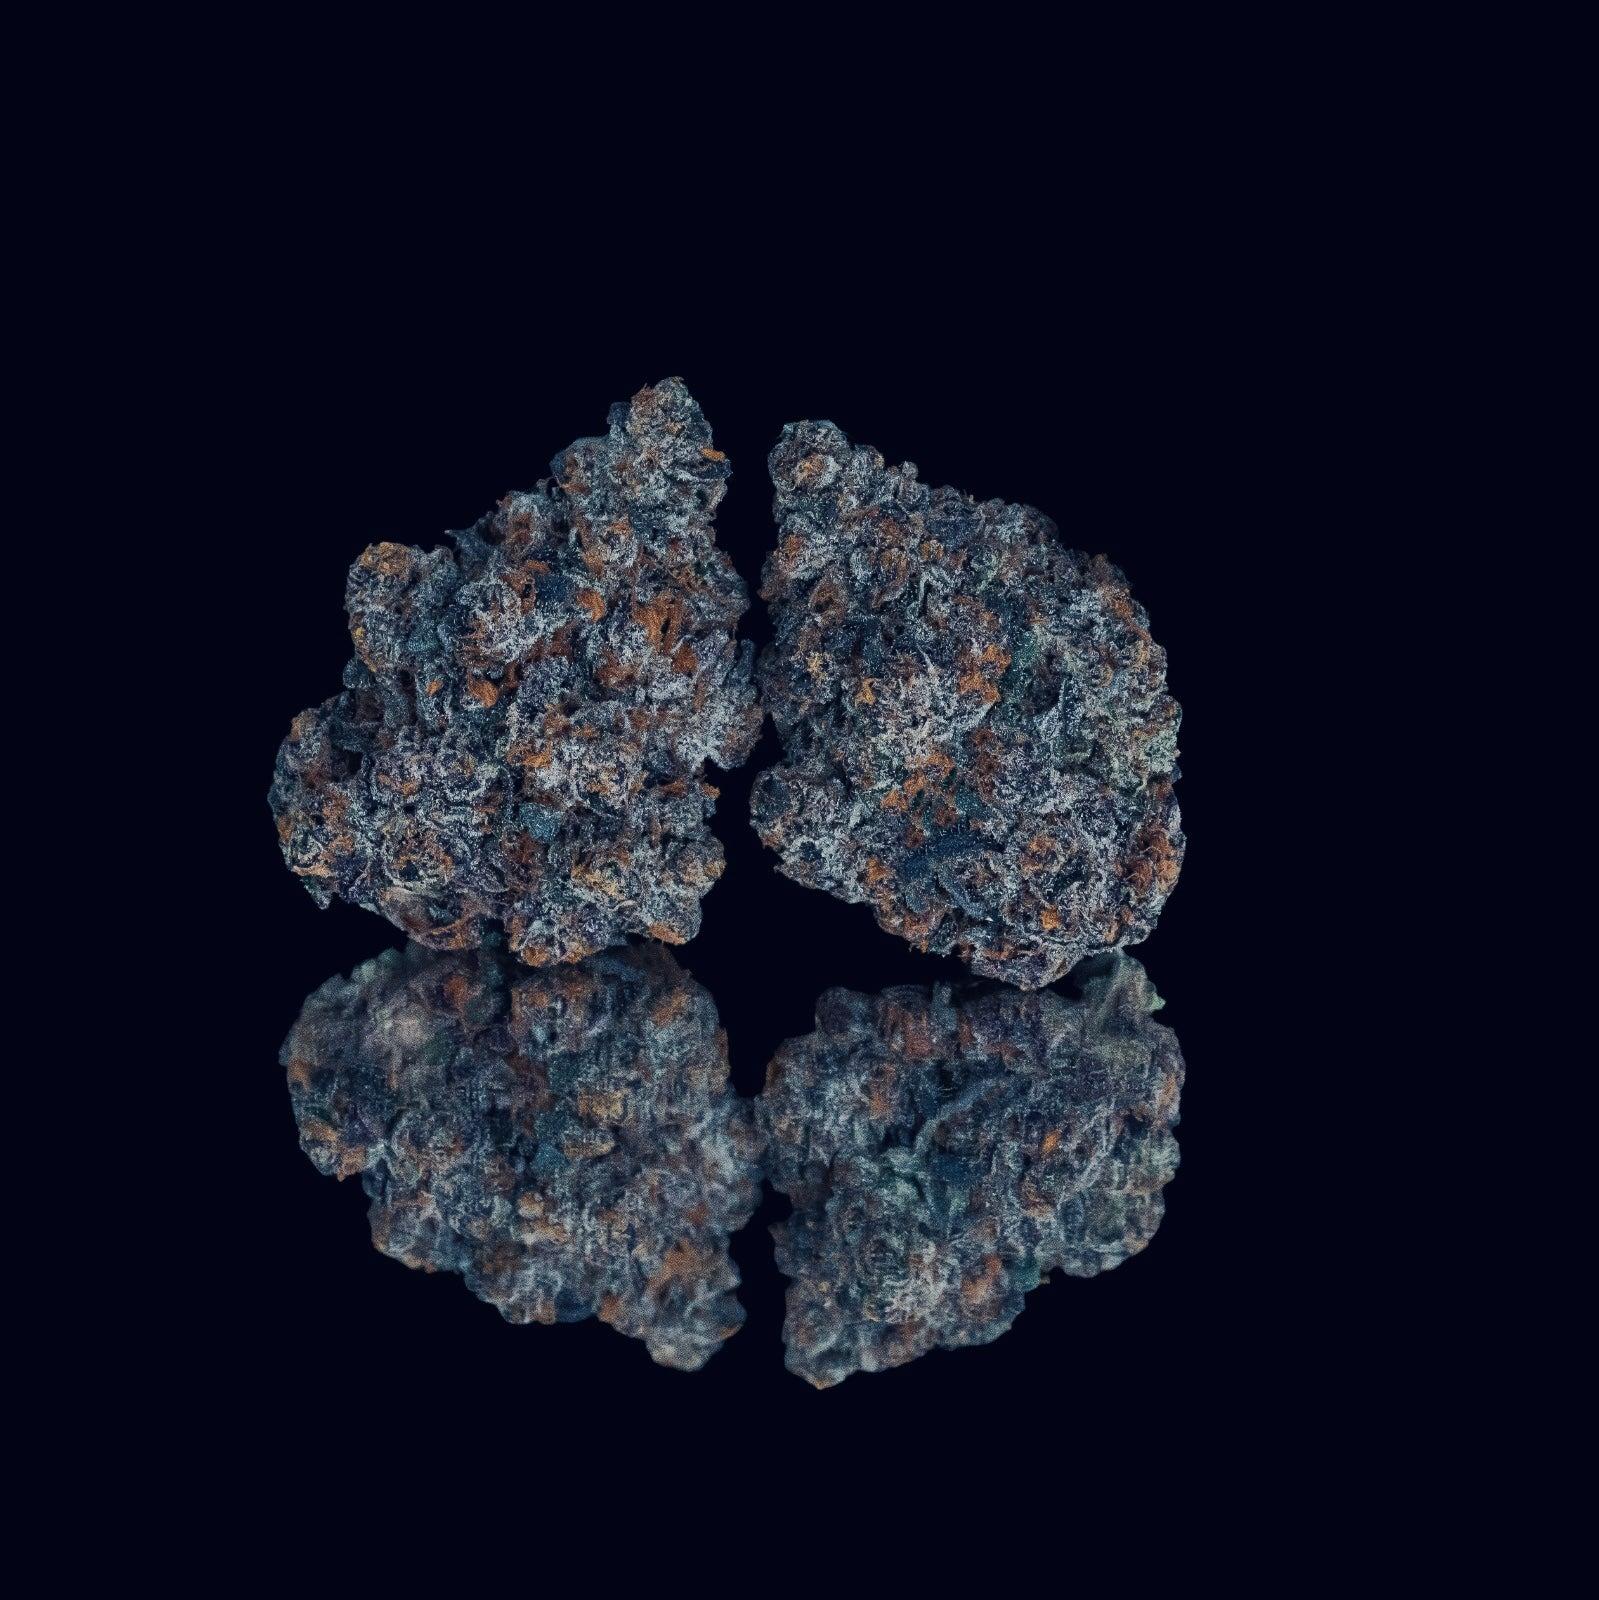 Two nugs of cannabis flower from the Grape Ape strain rest against each other above their reflection on a black surface.